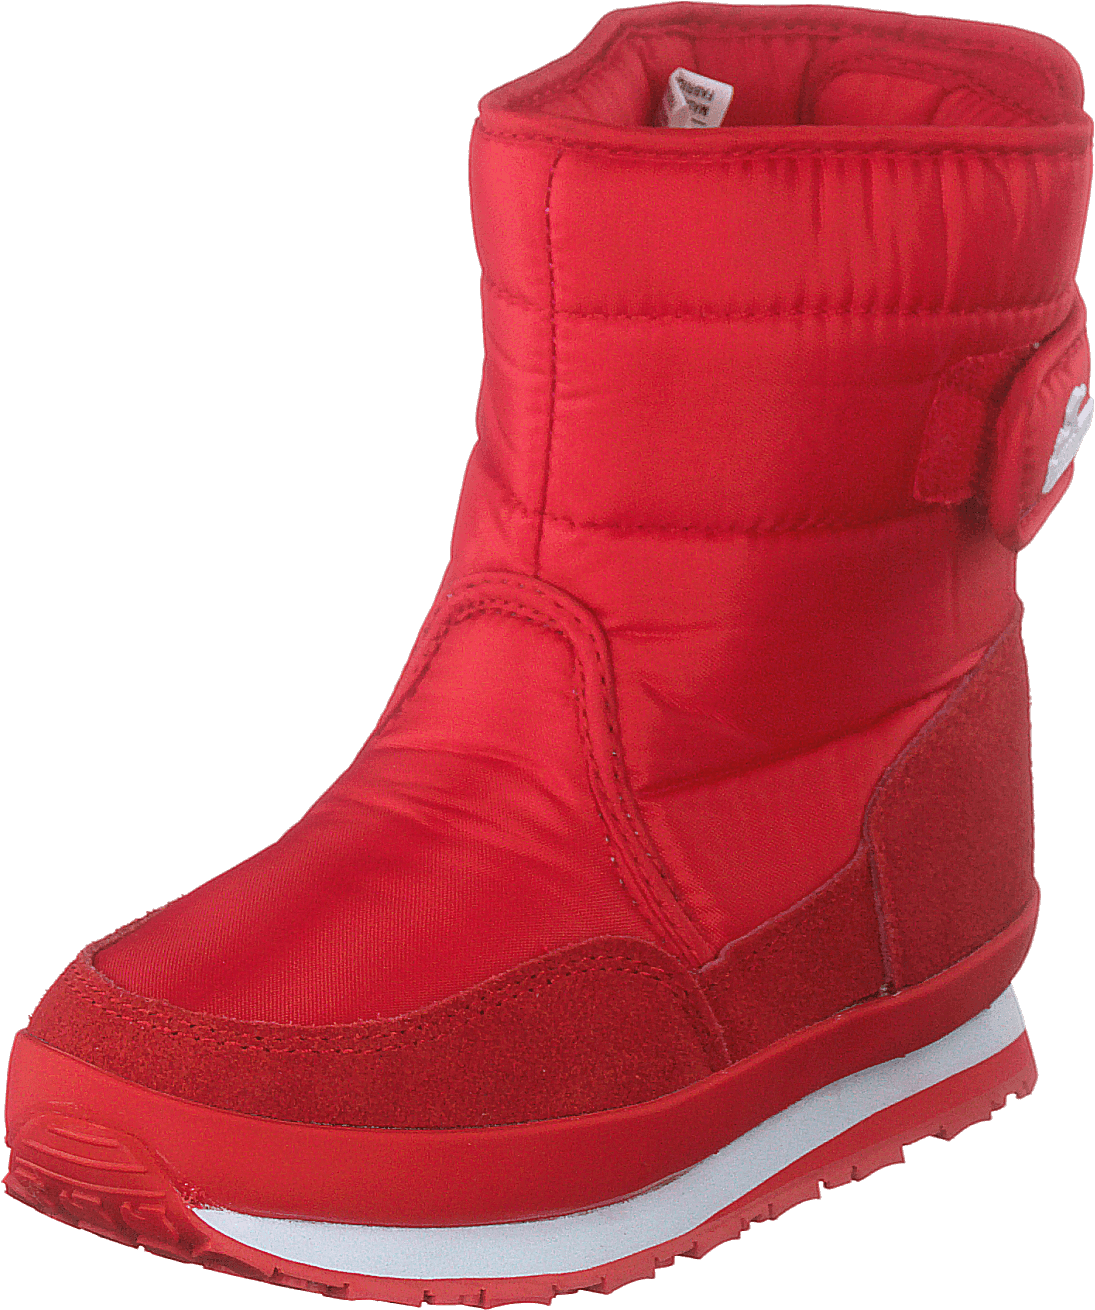 Rd Nylon Suede Solid Kids Red